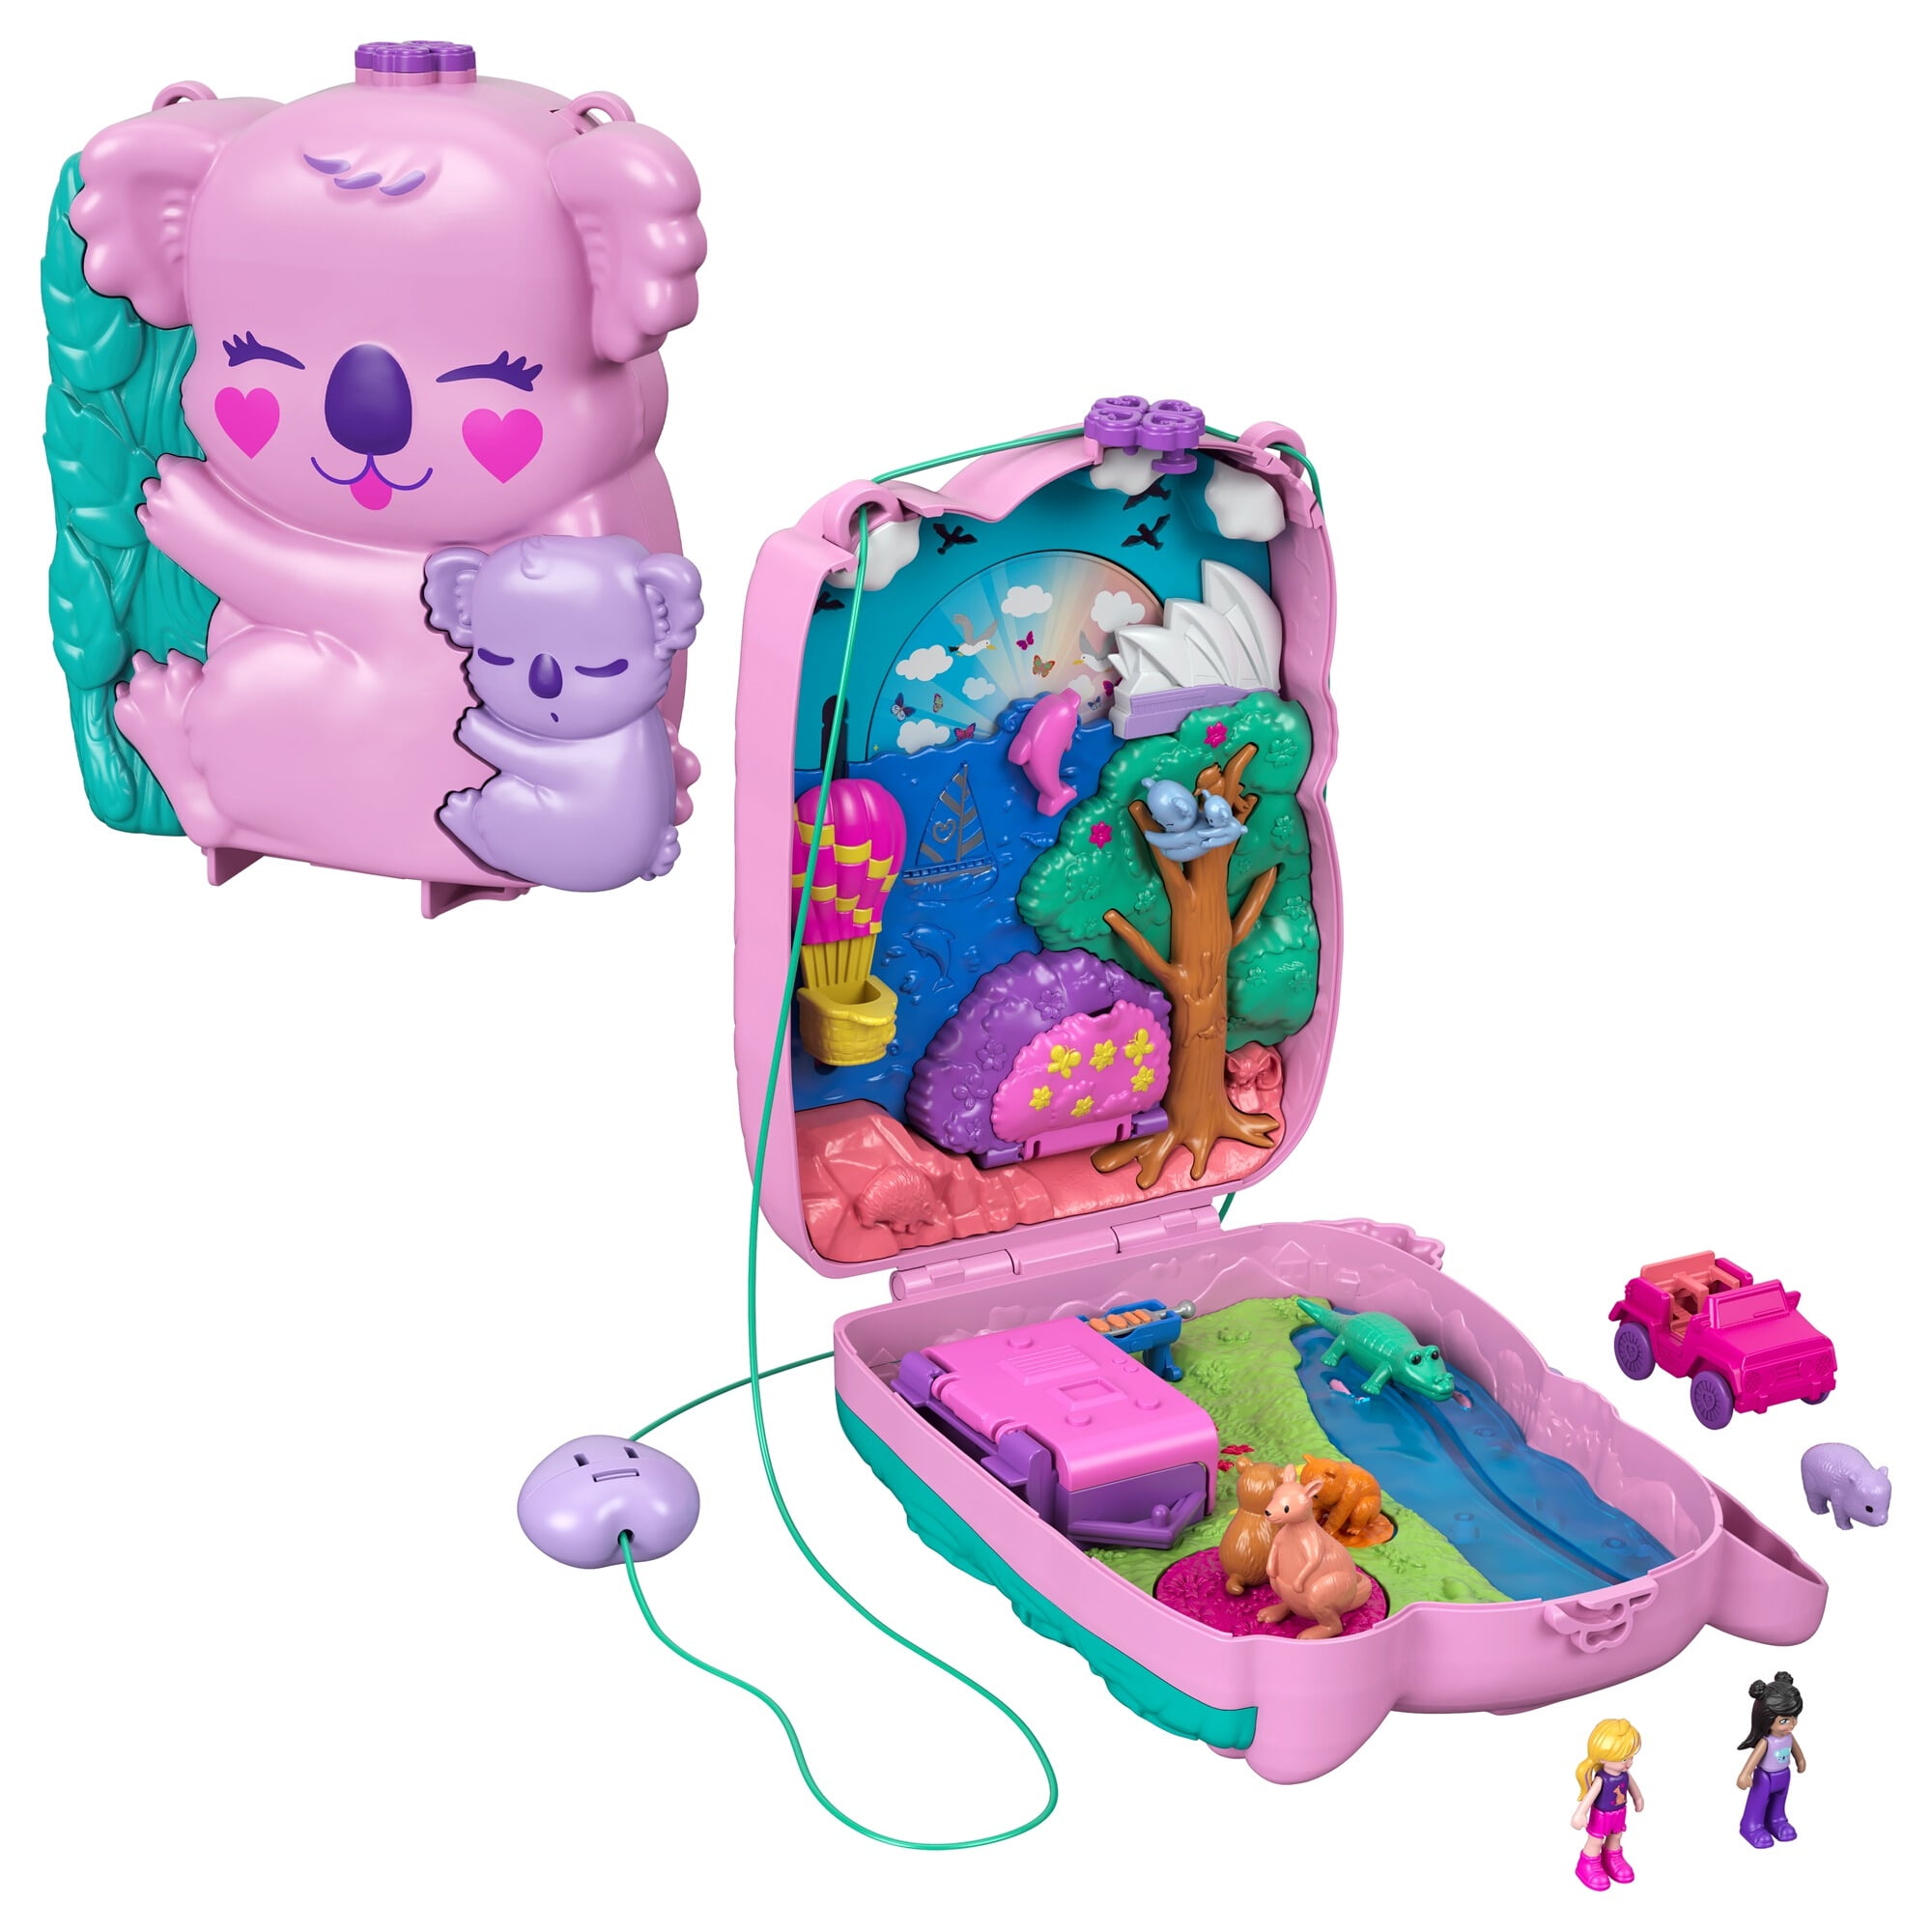 Polly Pocket Koala Purse Travel Toy with 2 Micro Toy and 5 Animals - Walmart.com